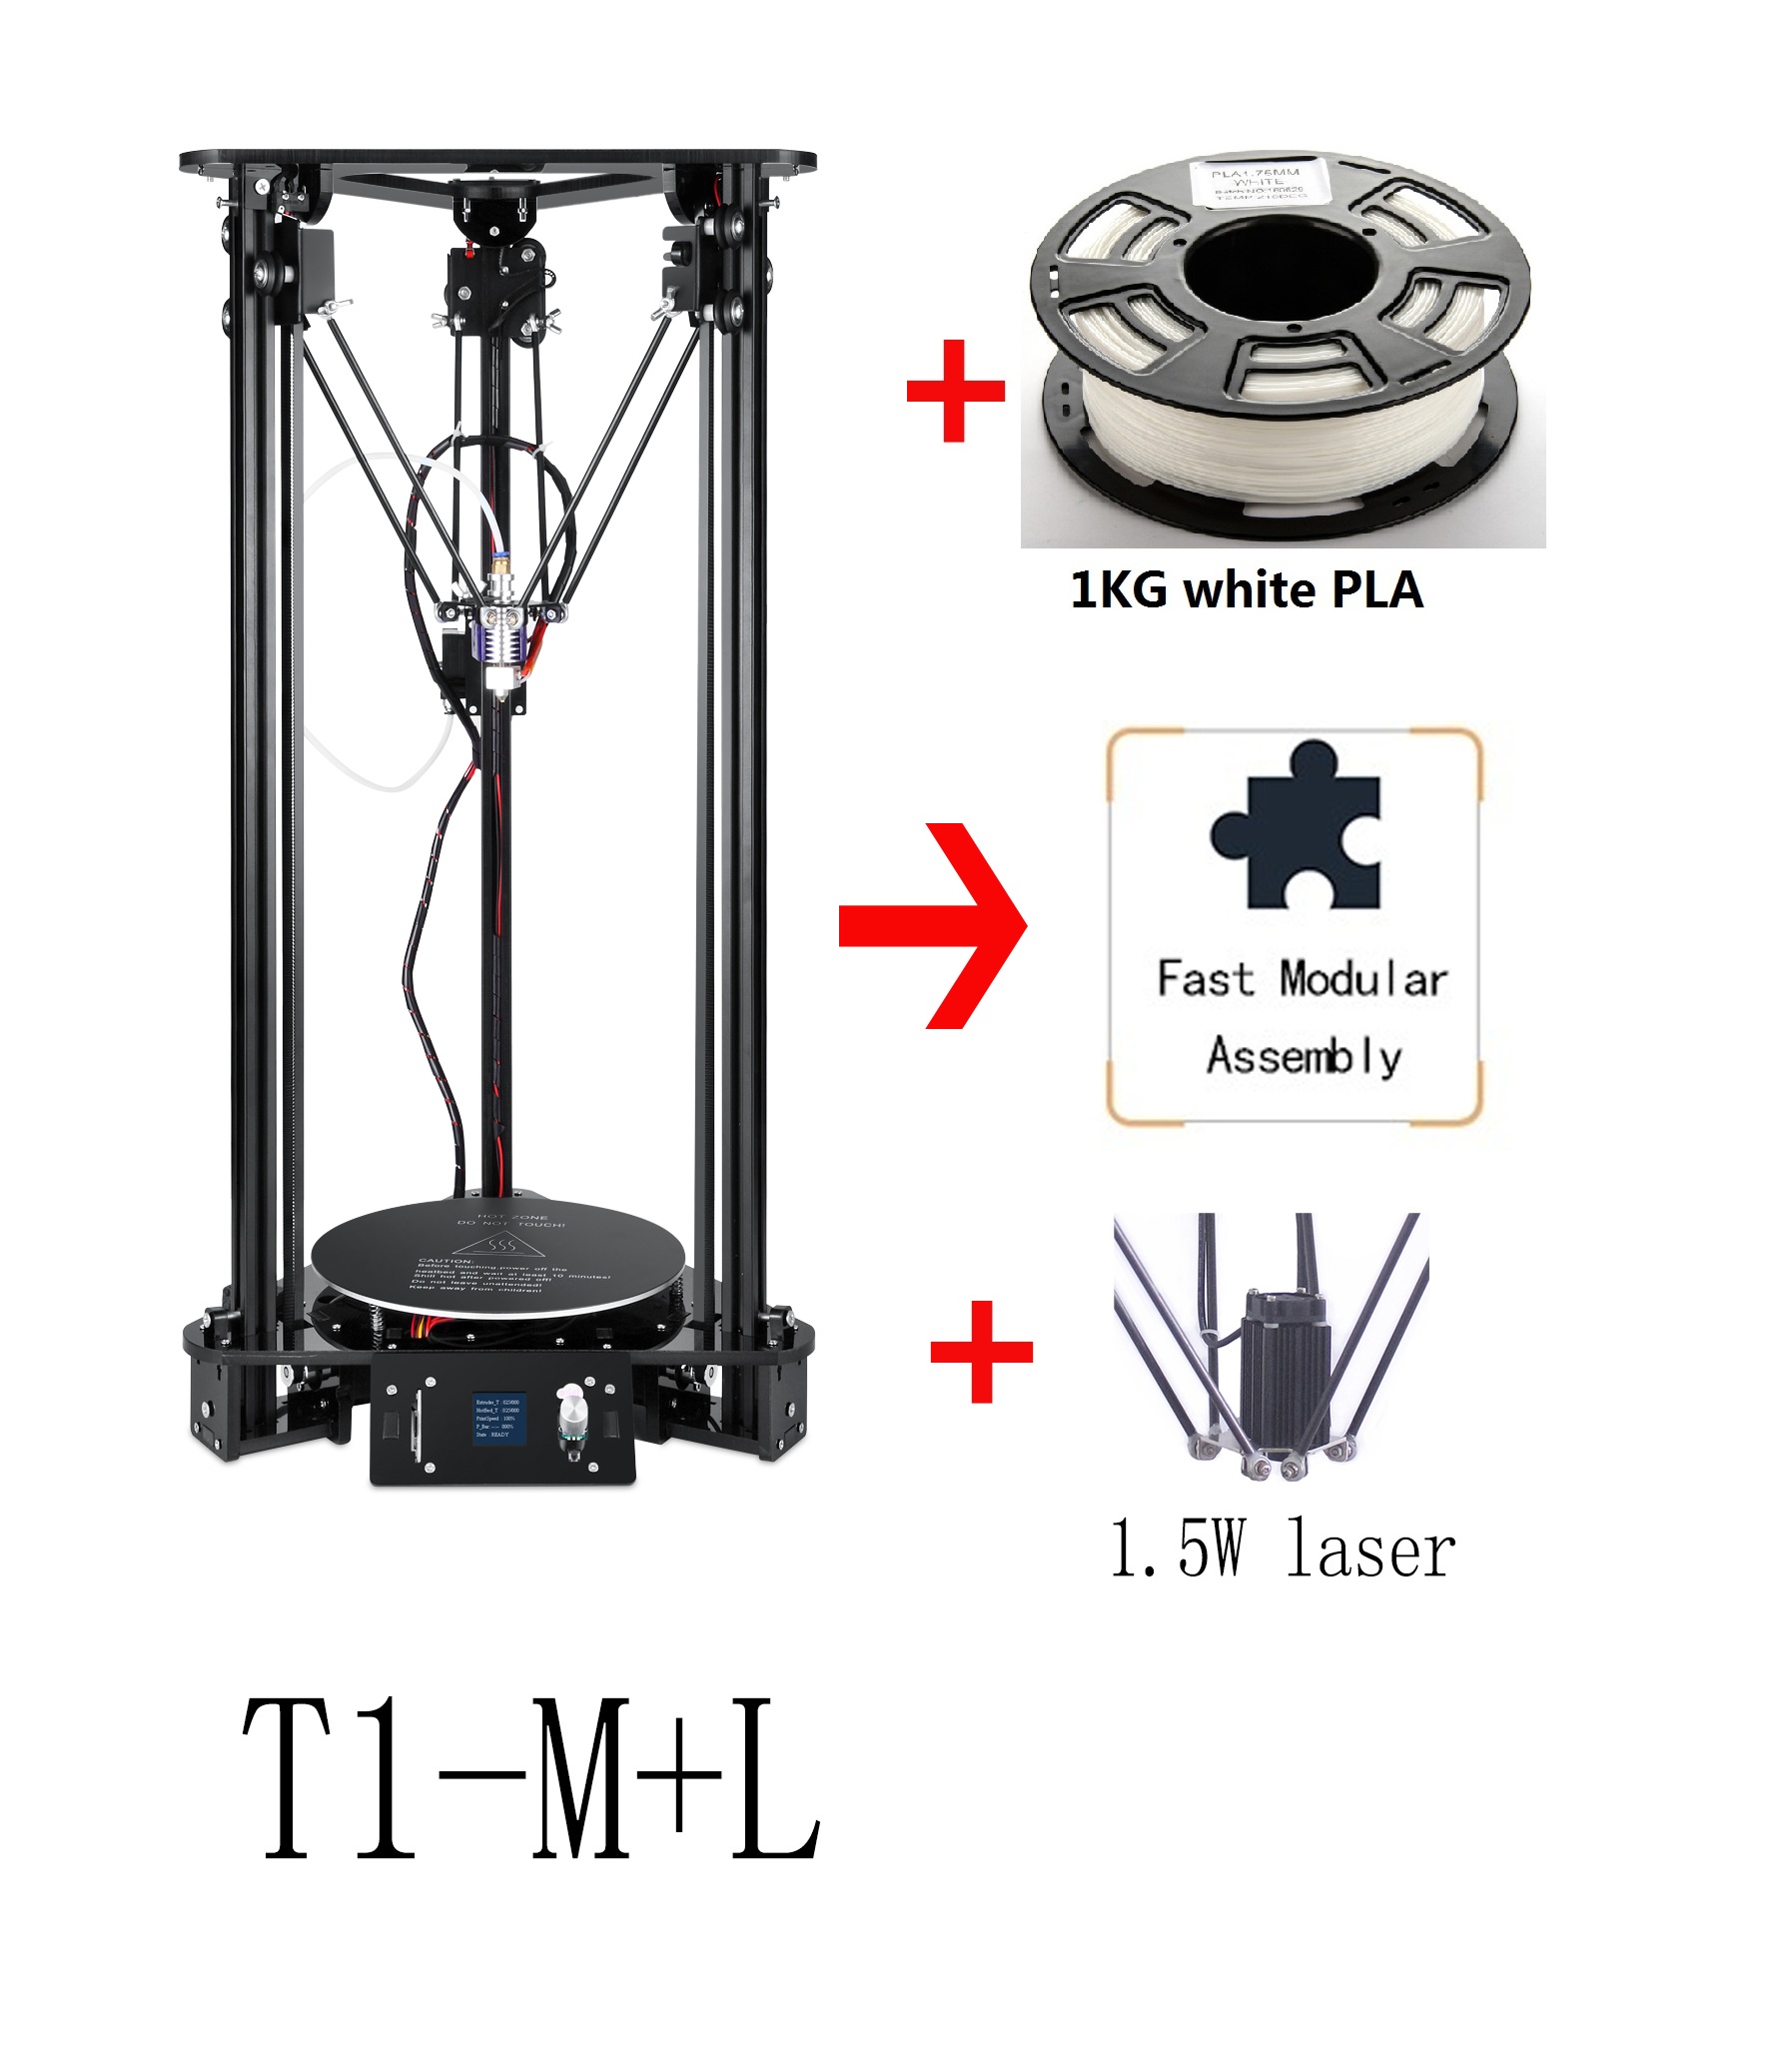 FLSUN® Delta Kossel 3D Printer 180*315mm Printing Size With Auto-leveling  Dual Cooling Fans Heated Bed 1.75mm 0.4mm Nozzle